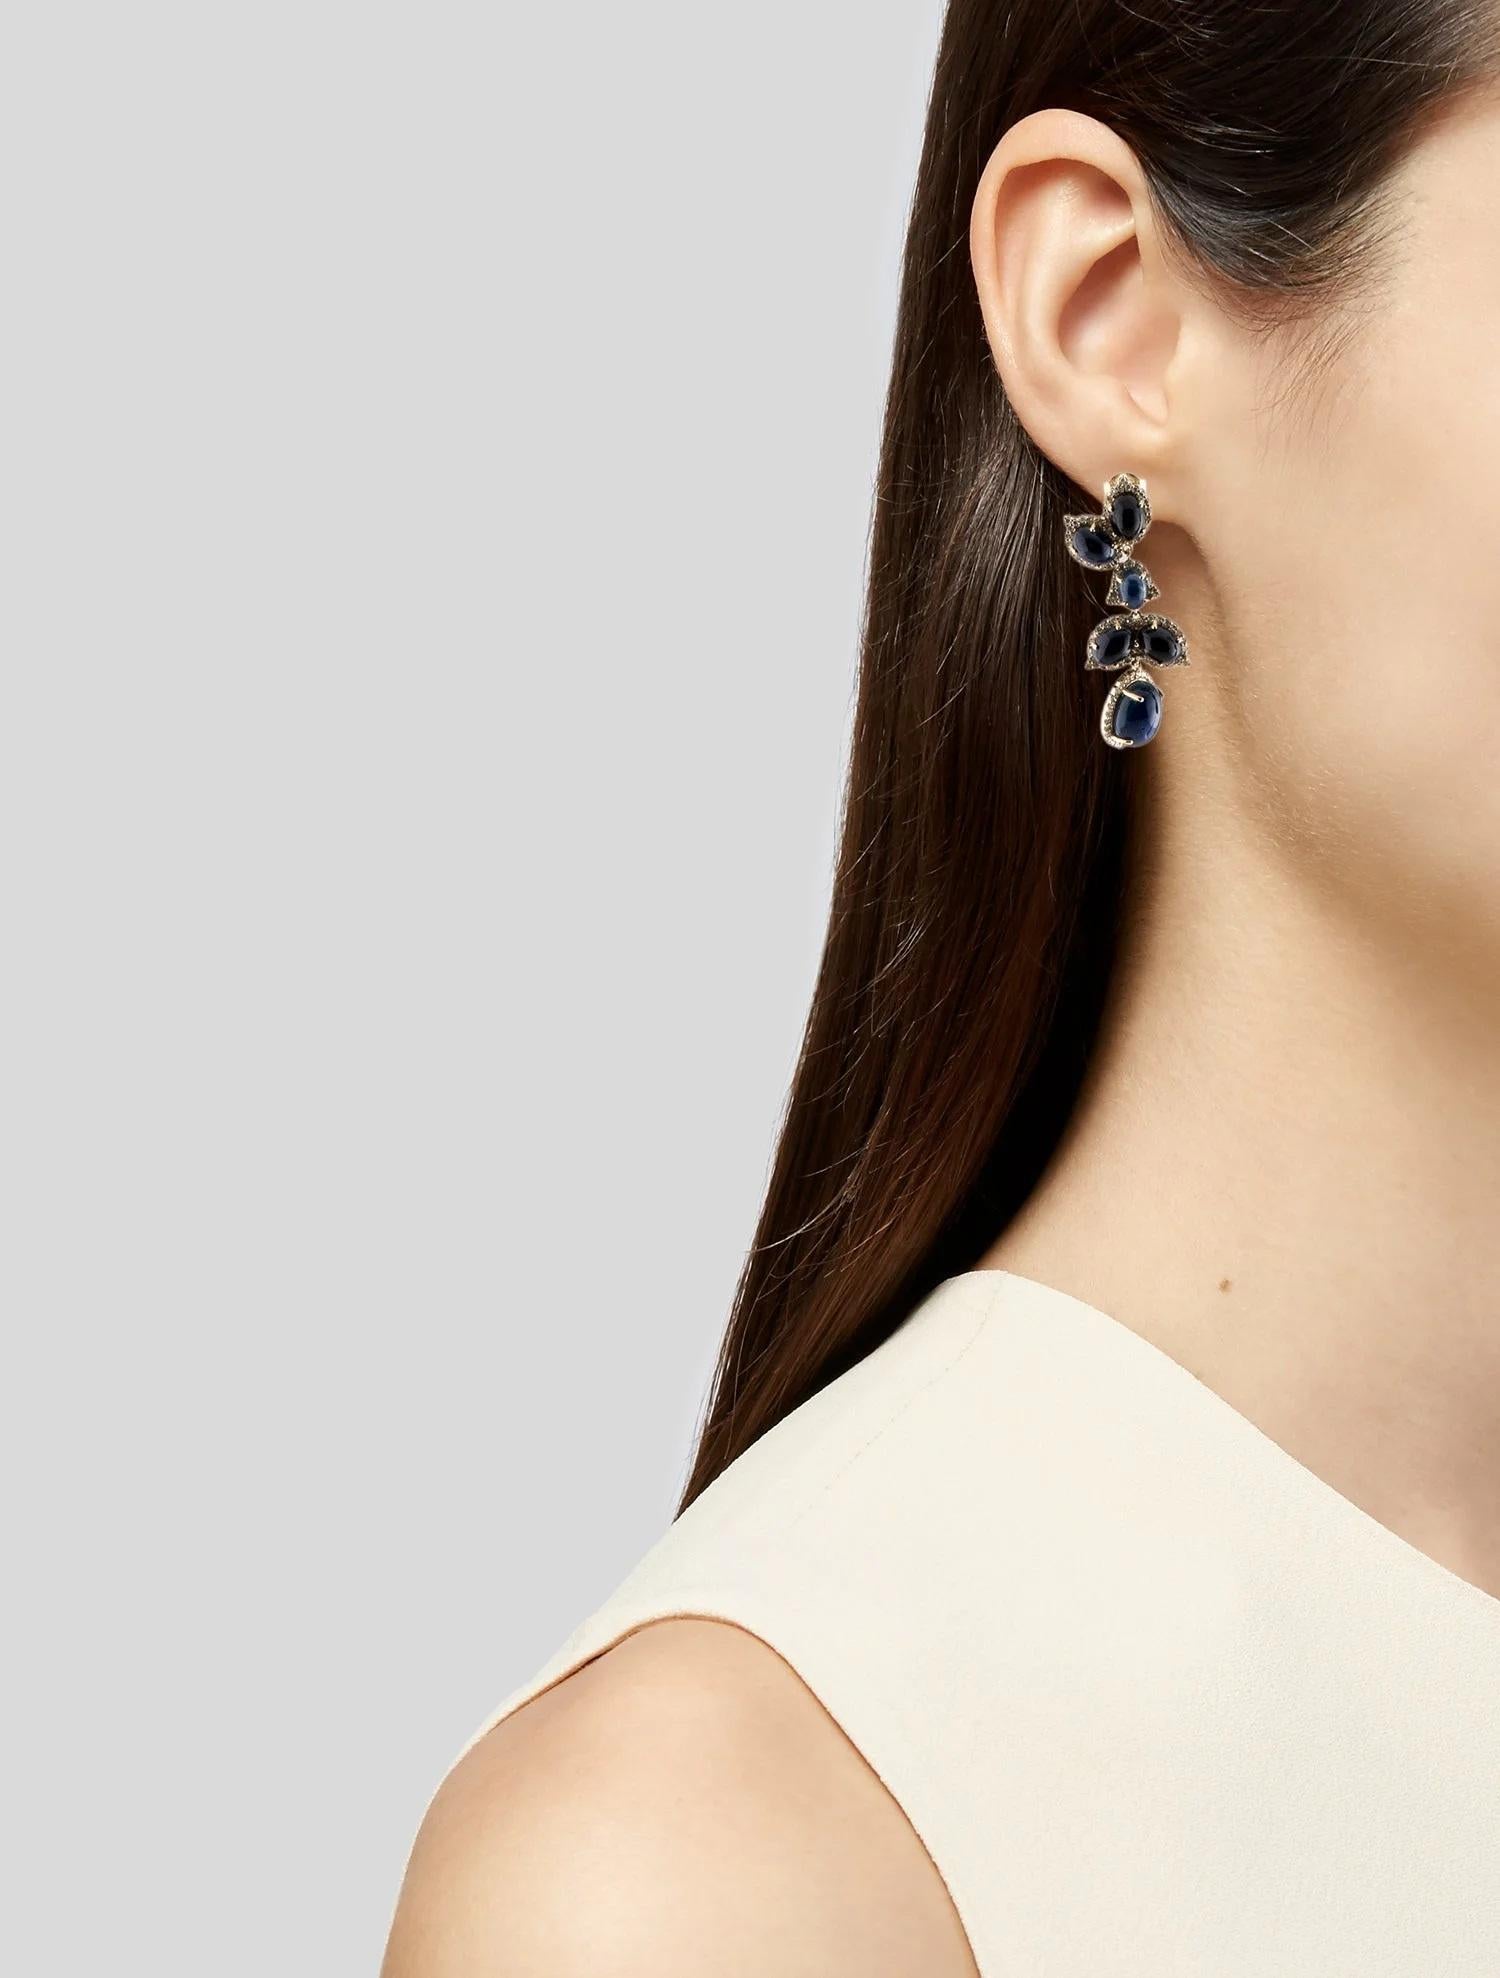 Elevate your jewelry collection with these stunning 14K Sapphire & Diamond Drop Earrings. Crafted in luxurious yellow gold, these earrings feature 1.48 carat oval sapphire cabochons, exuding timeless elegance. Adorned with 226 single-cut diamonds